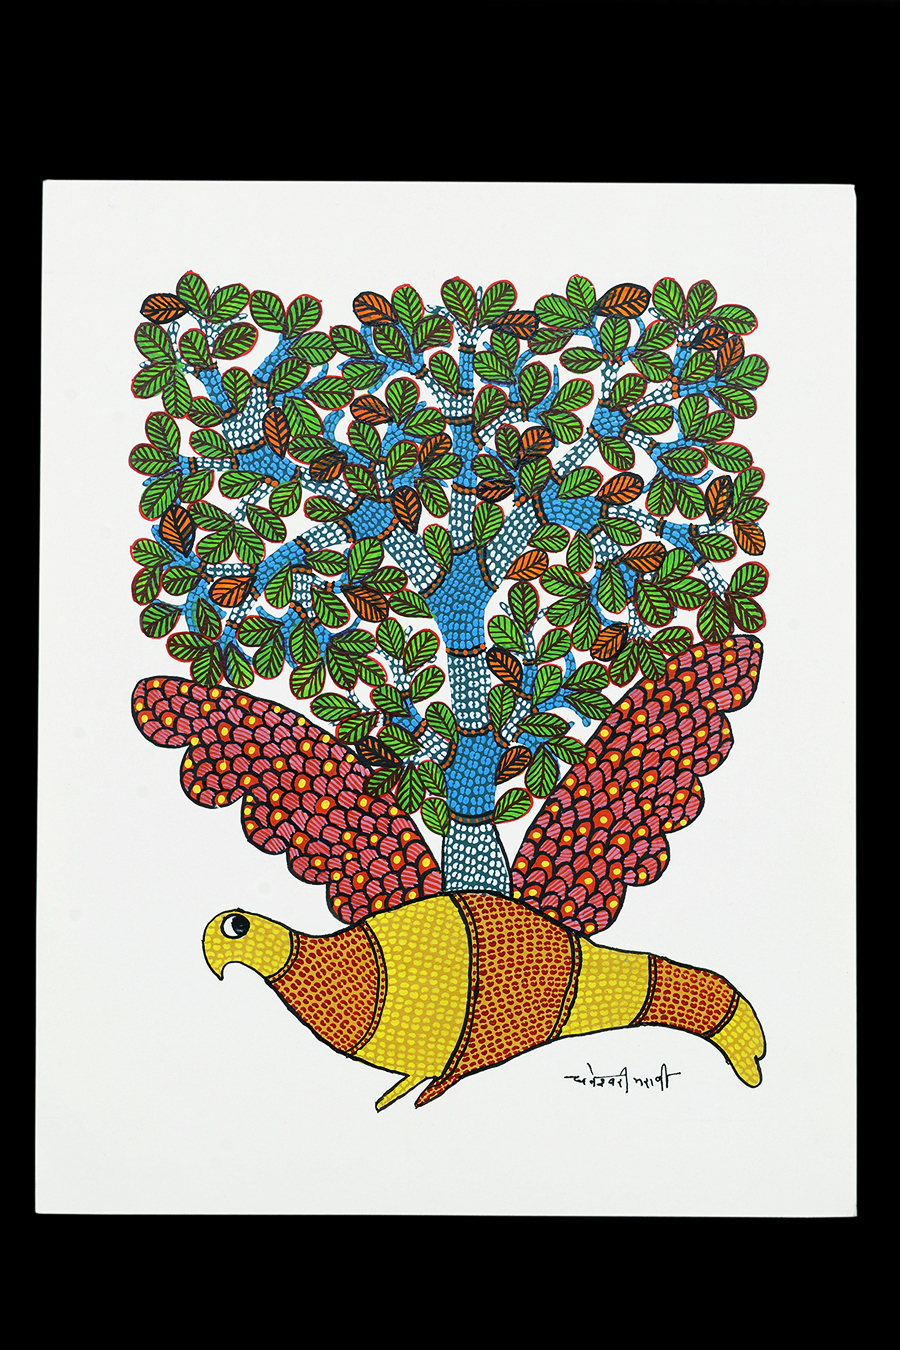 Eagle - Gond Painting